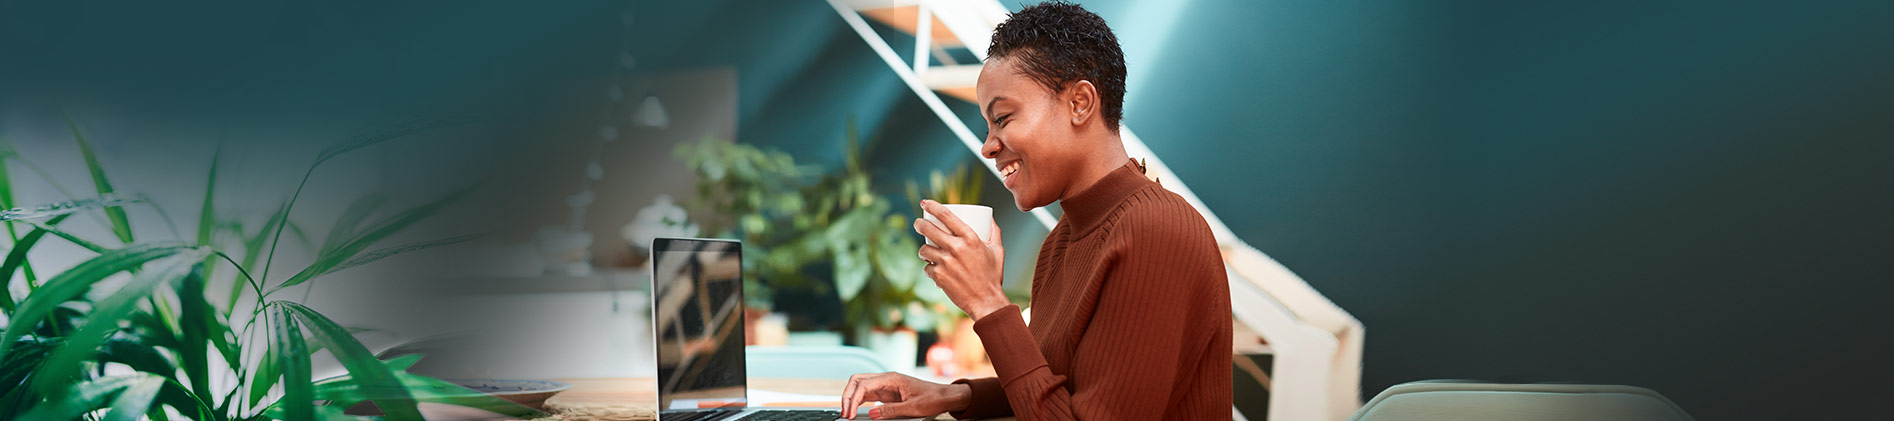 Woman smiling and sitting at a desk while drinking coffee and typing on her laptop